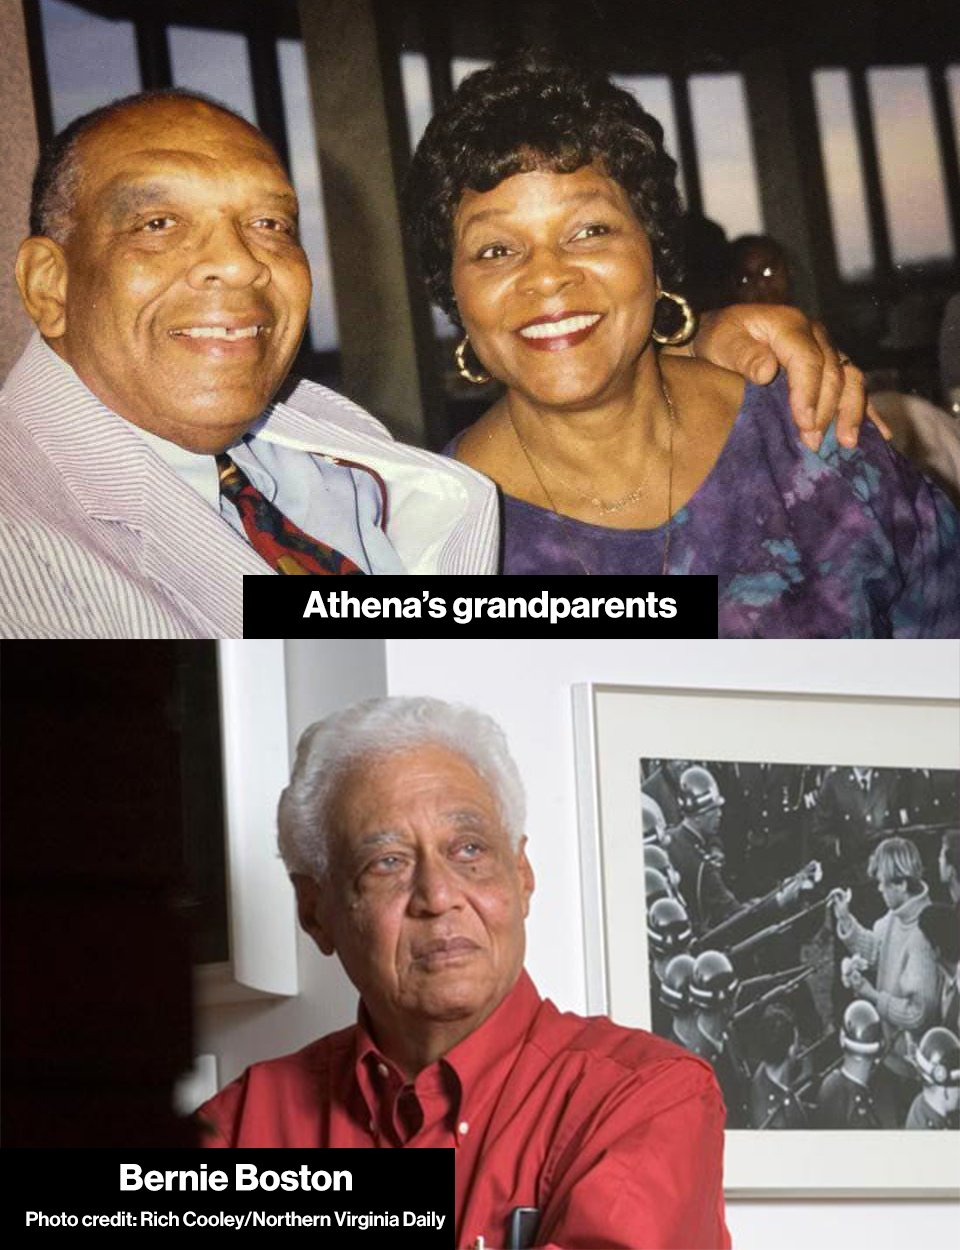 A photo of Athena Lemon's grandparents as well as Bernie Boston '55 in a separate photo.